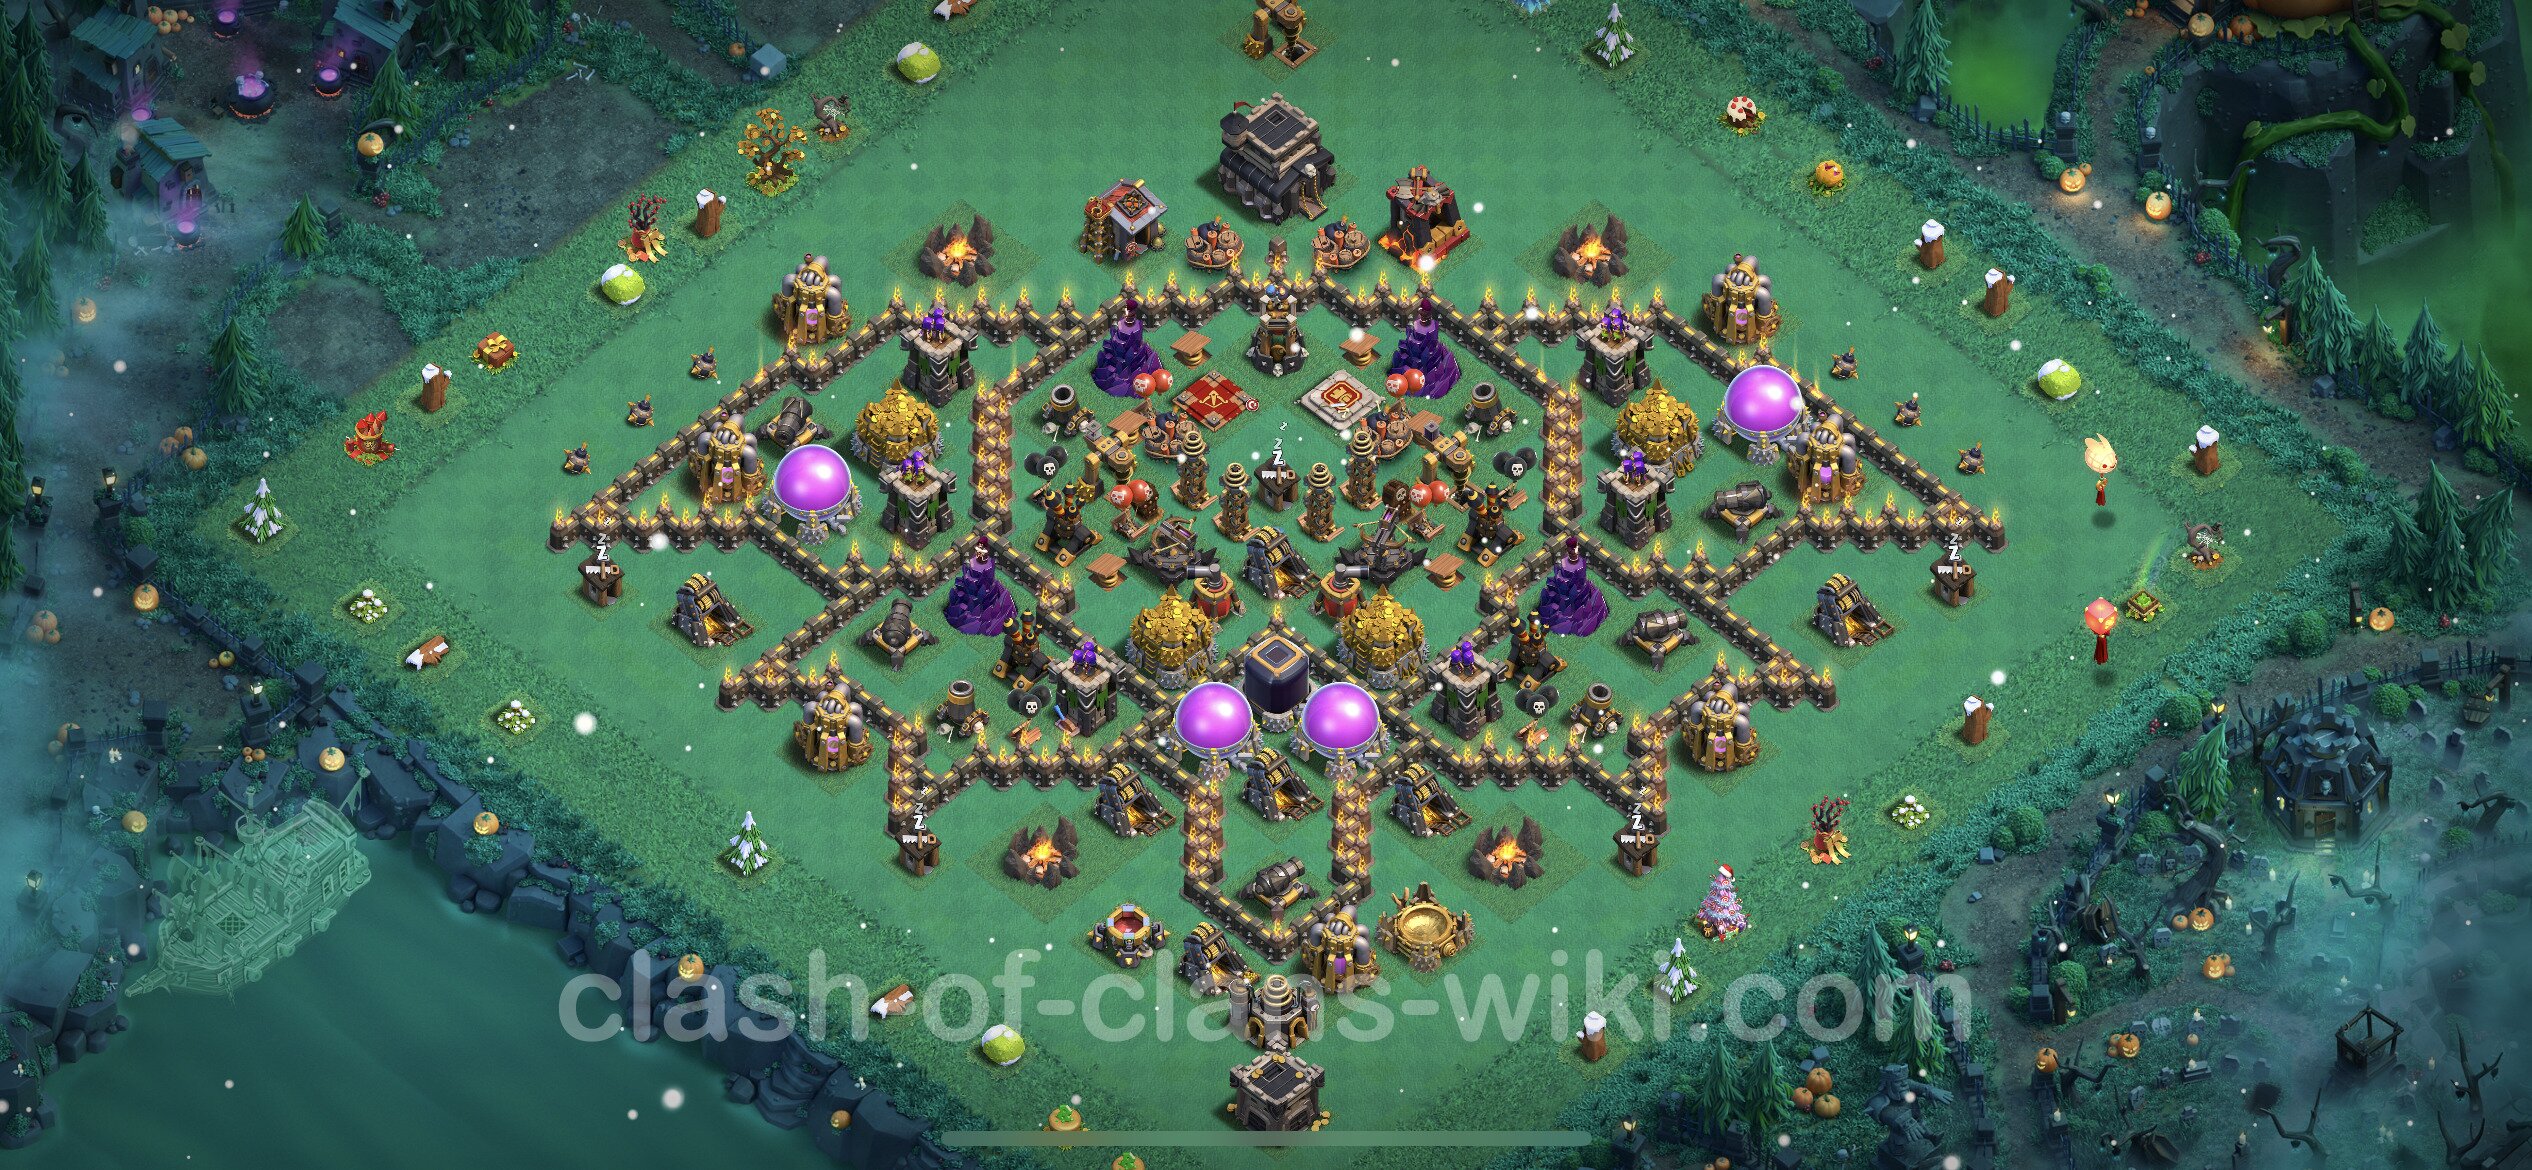 Funny Troll Base TH9 with Link - Town Hall Level 9 Art Base Copy, #16